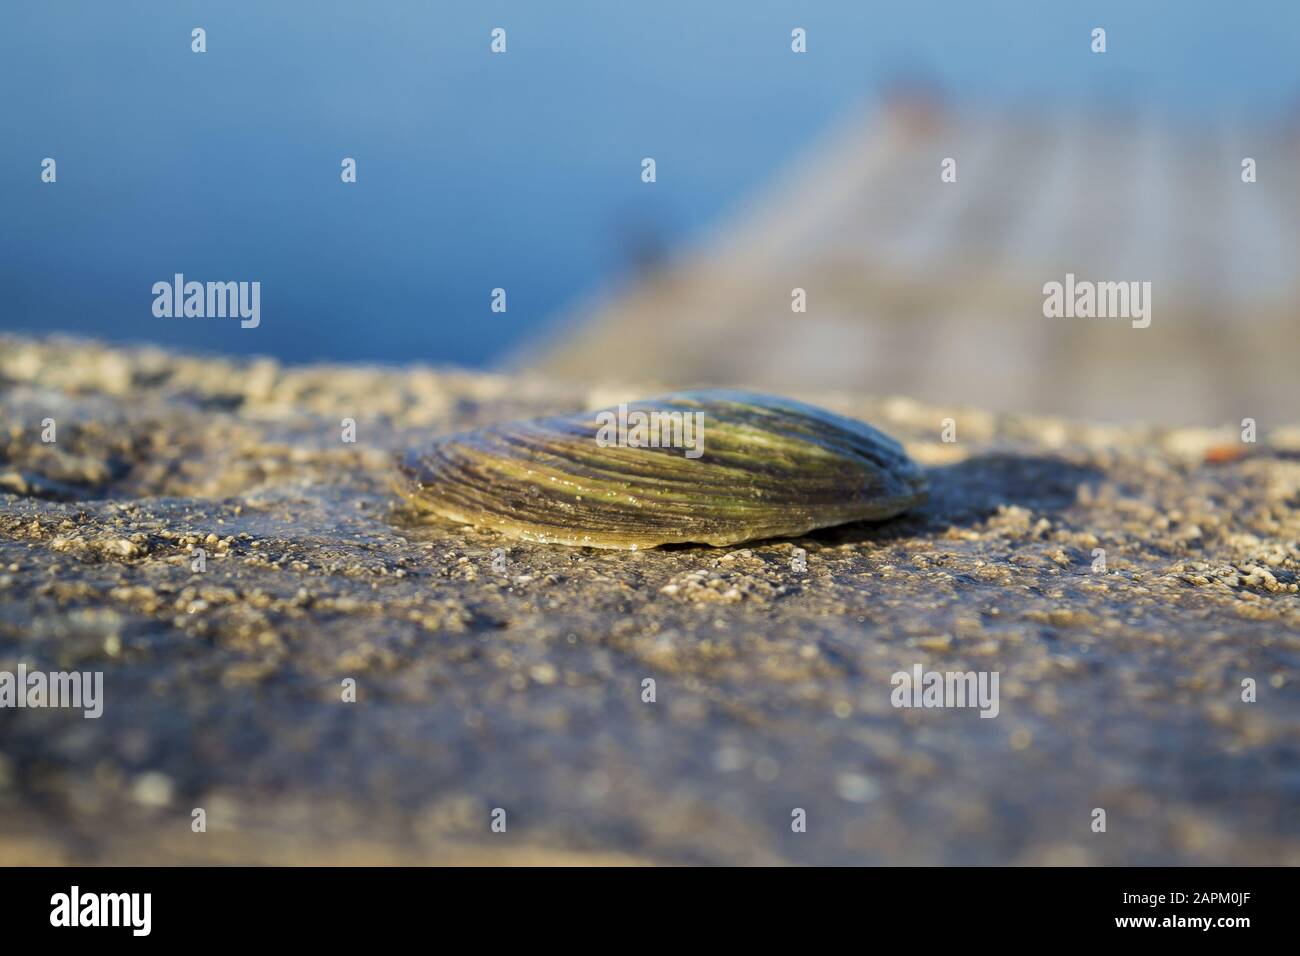 Shallow focus shot of a clam shell on a ledge Stock Photo